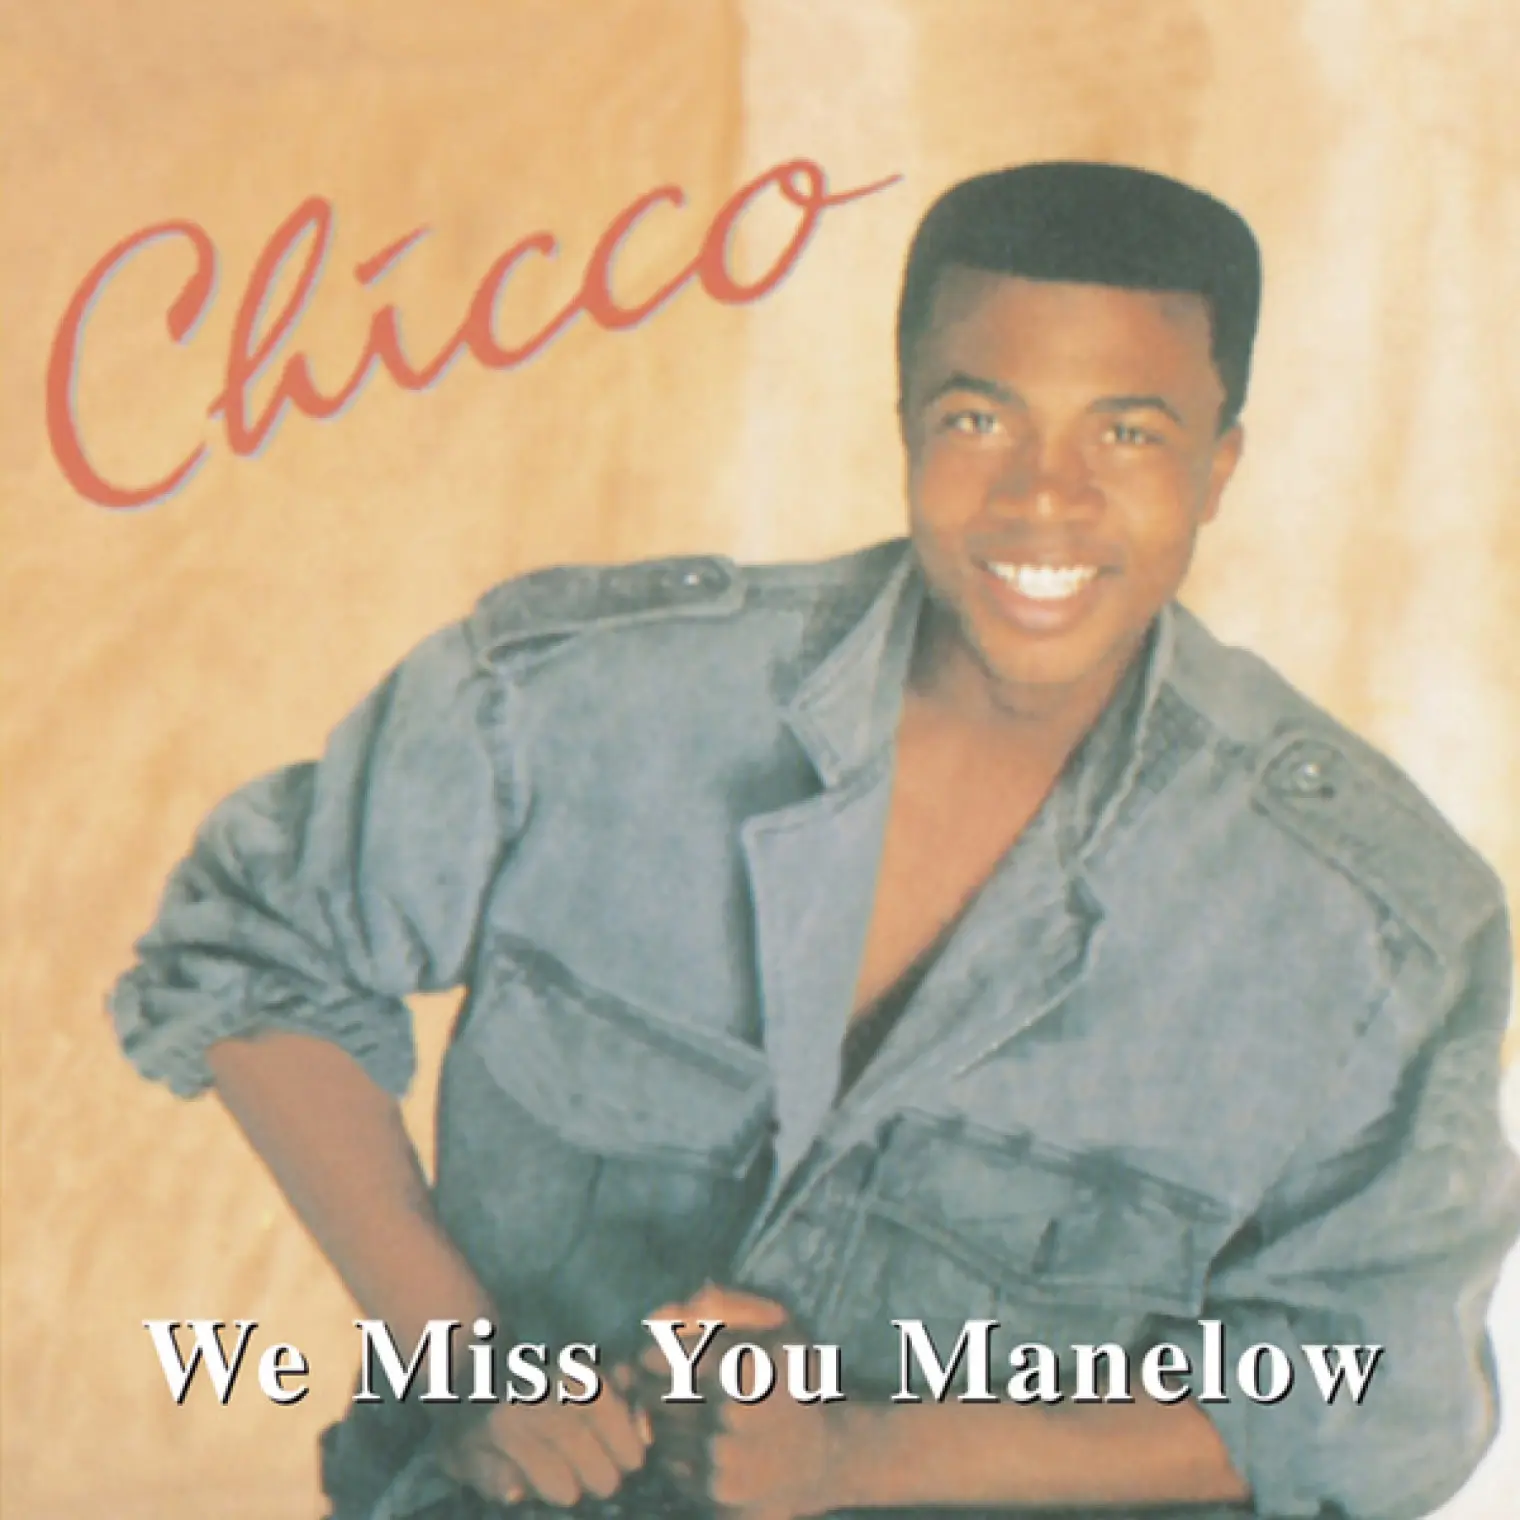 We Miss You Manelow -  Chicco 